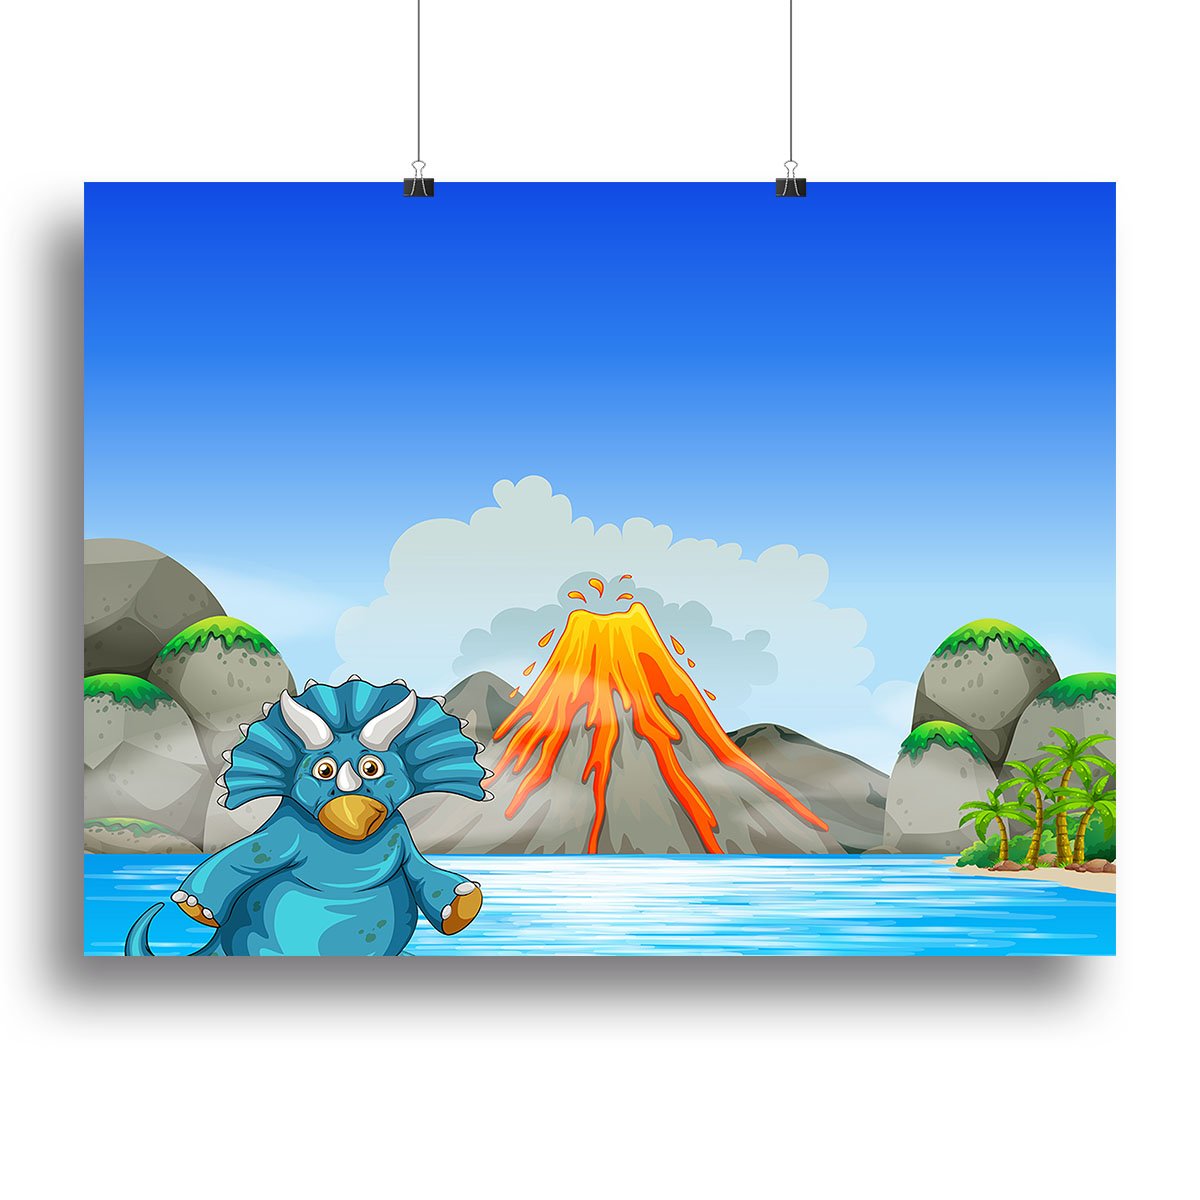 Dinosaur living by the lake Canvas Print or Poster